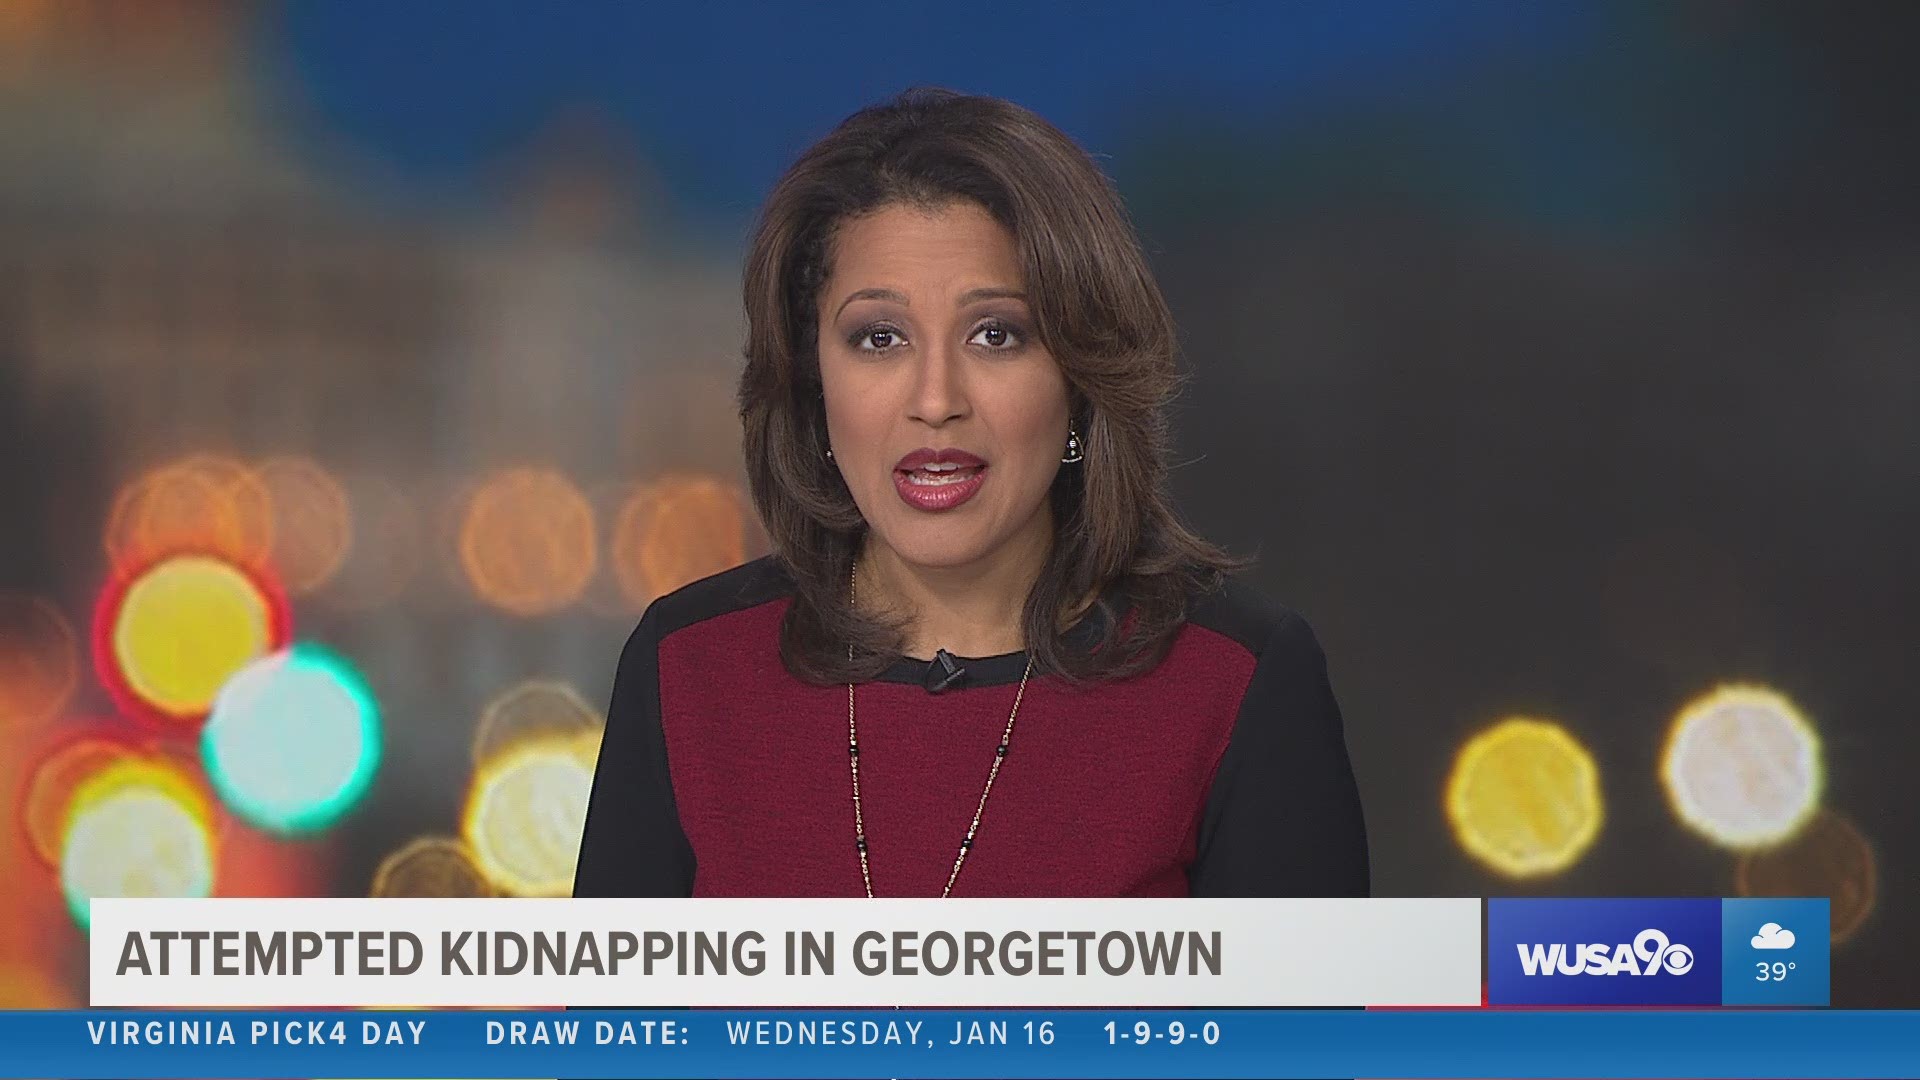 Authorities are asking for the public's help to identify a woman they said tried to kidnap a child in Georgetown on Tuesday.